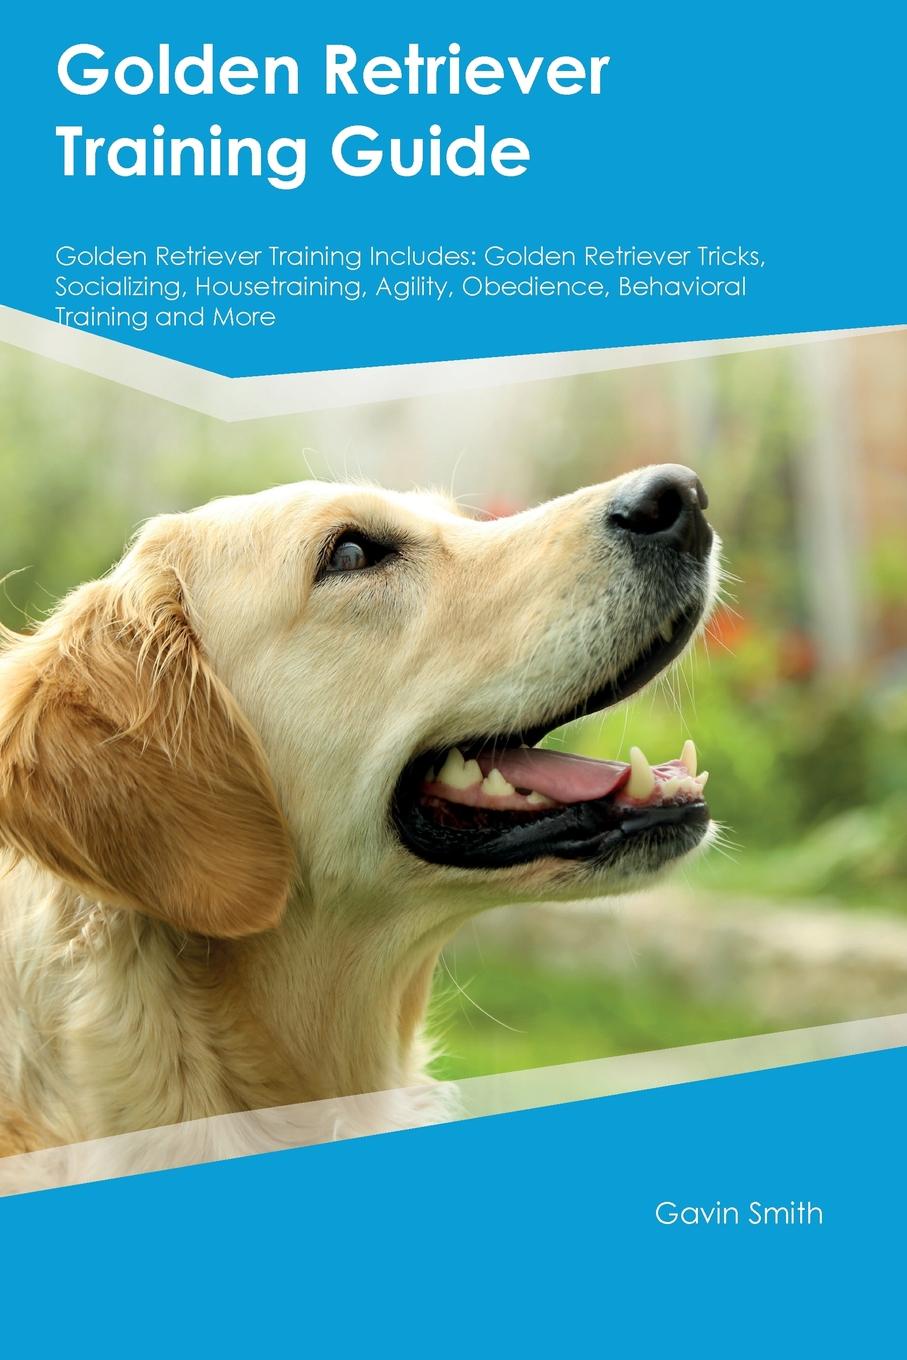 Golden Retriever Training Guide Golden Retriever Training Includes. Golden Retriever Tricks, Socializing, Housetraining, Agility, Obedience, Behavioral Training and More